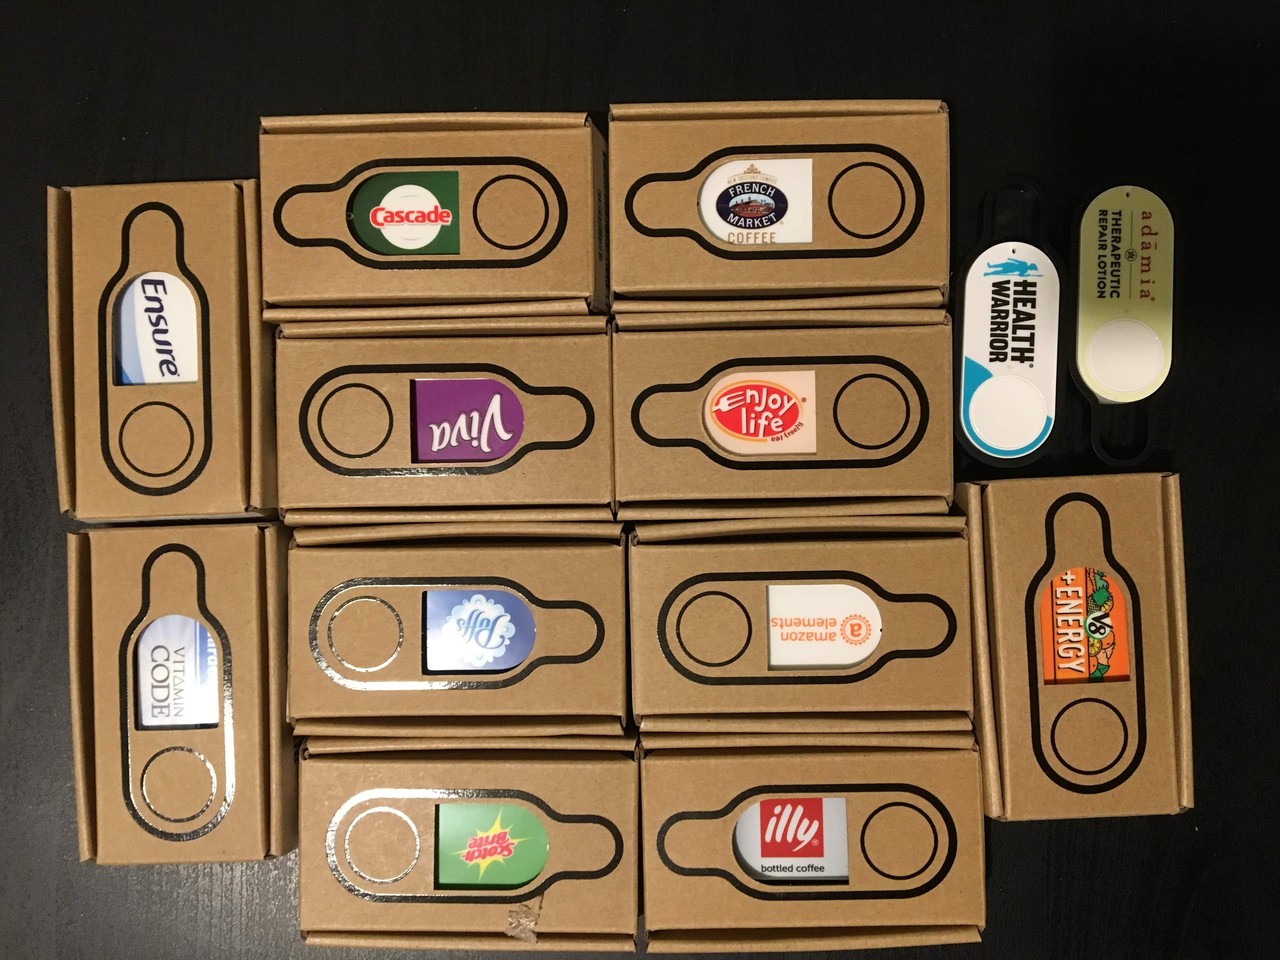 Dash buttons